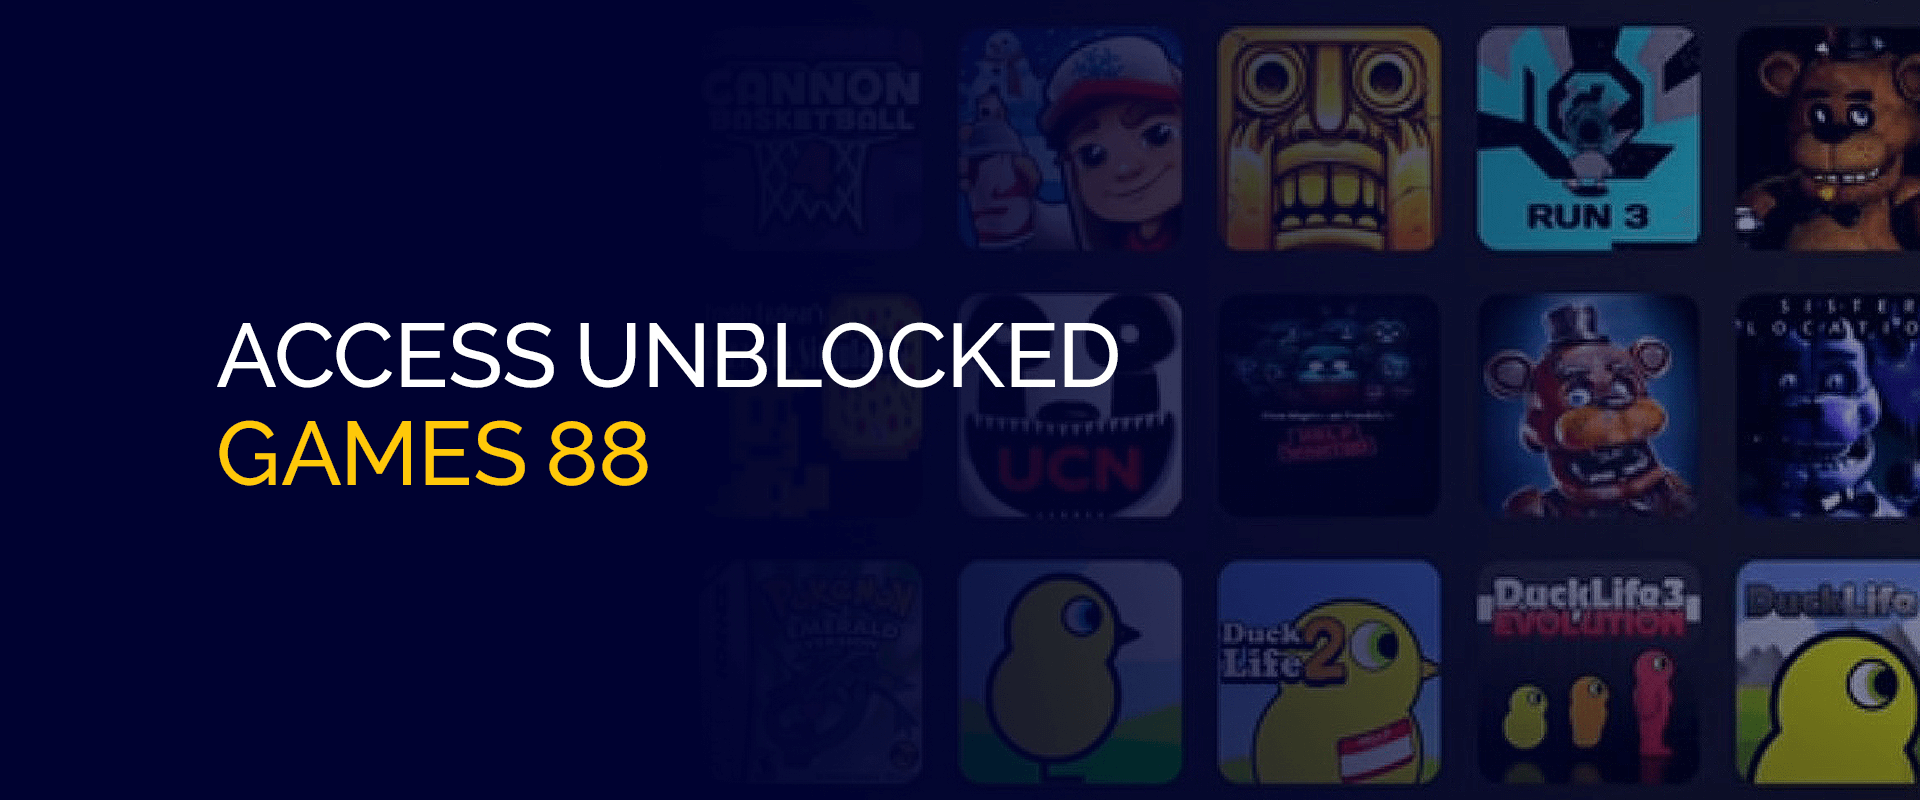 Access Unblocked Games 88